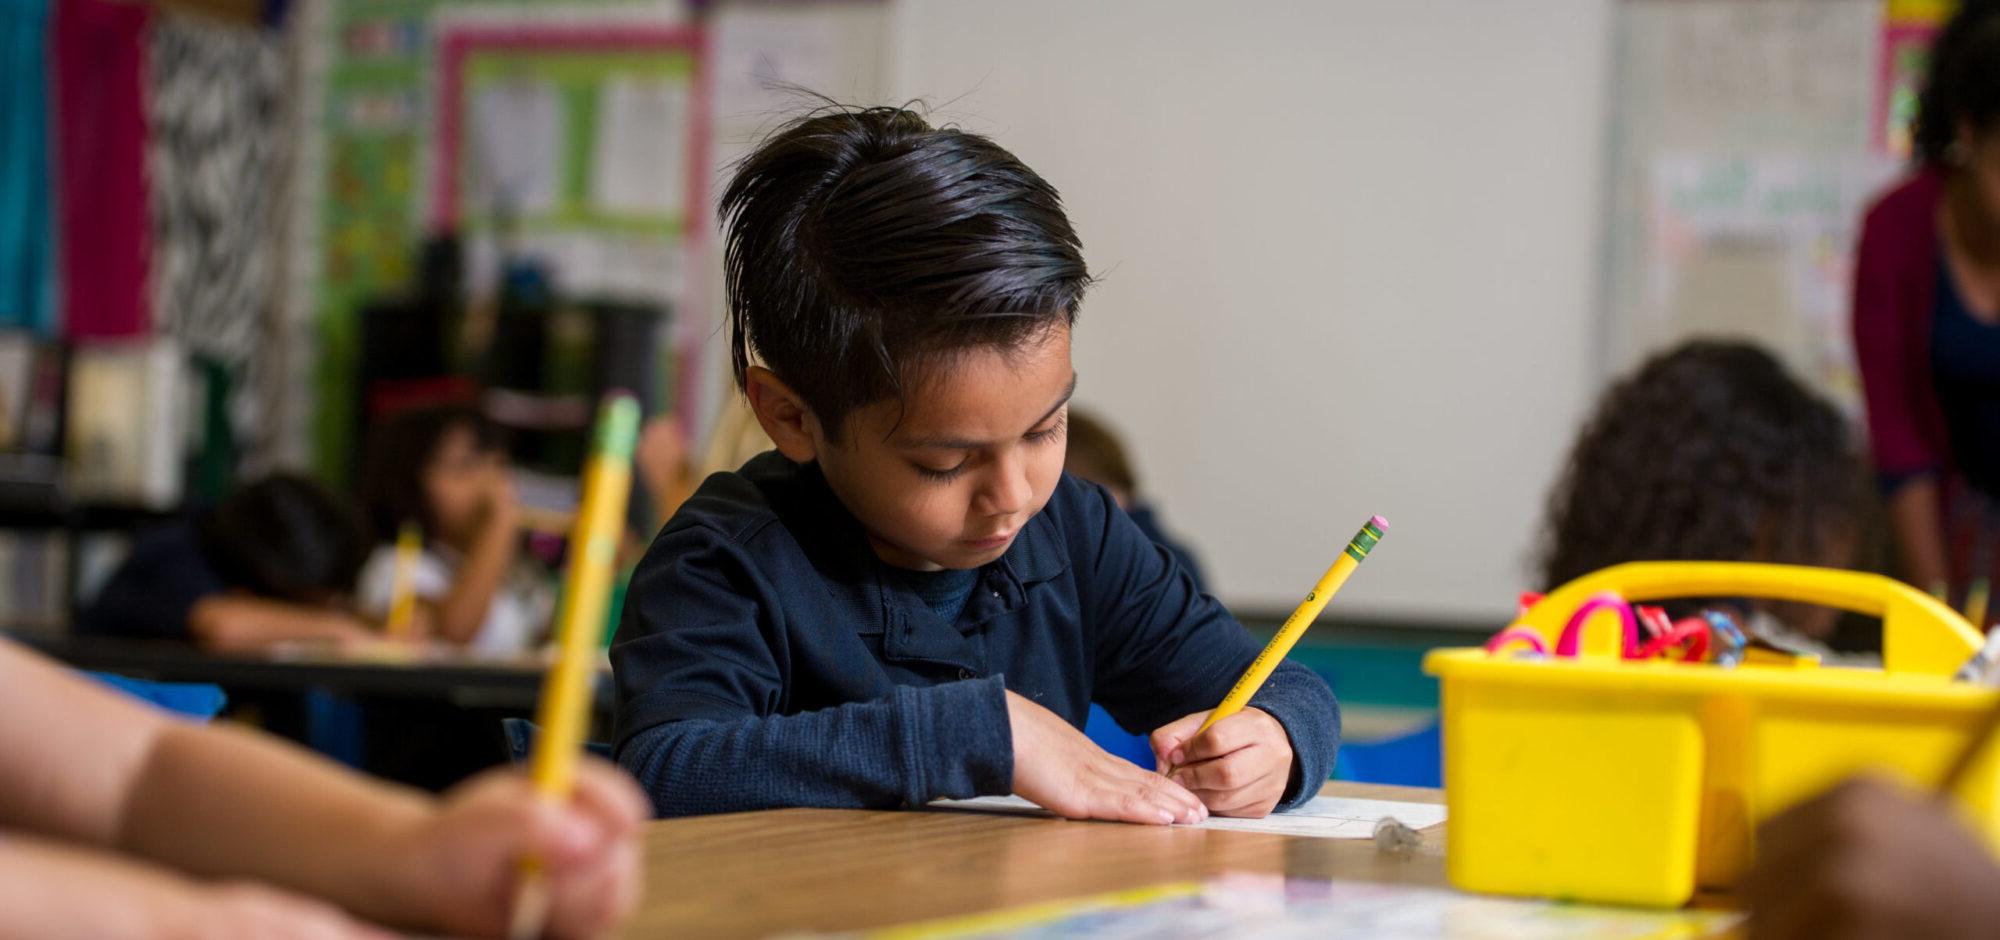 Young hispanic boy writing with pencil in classroom.